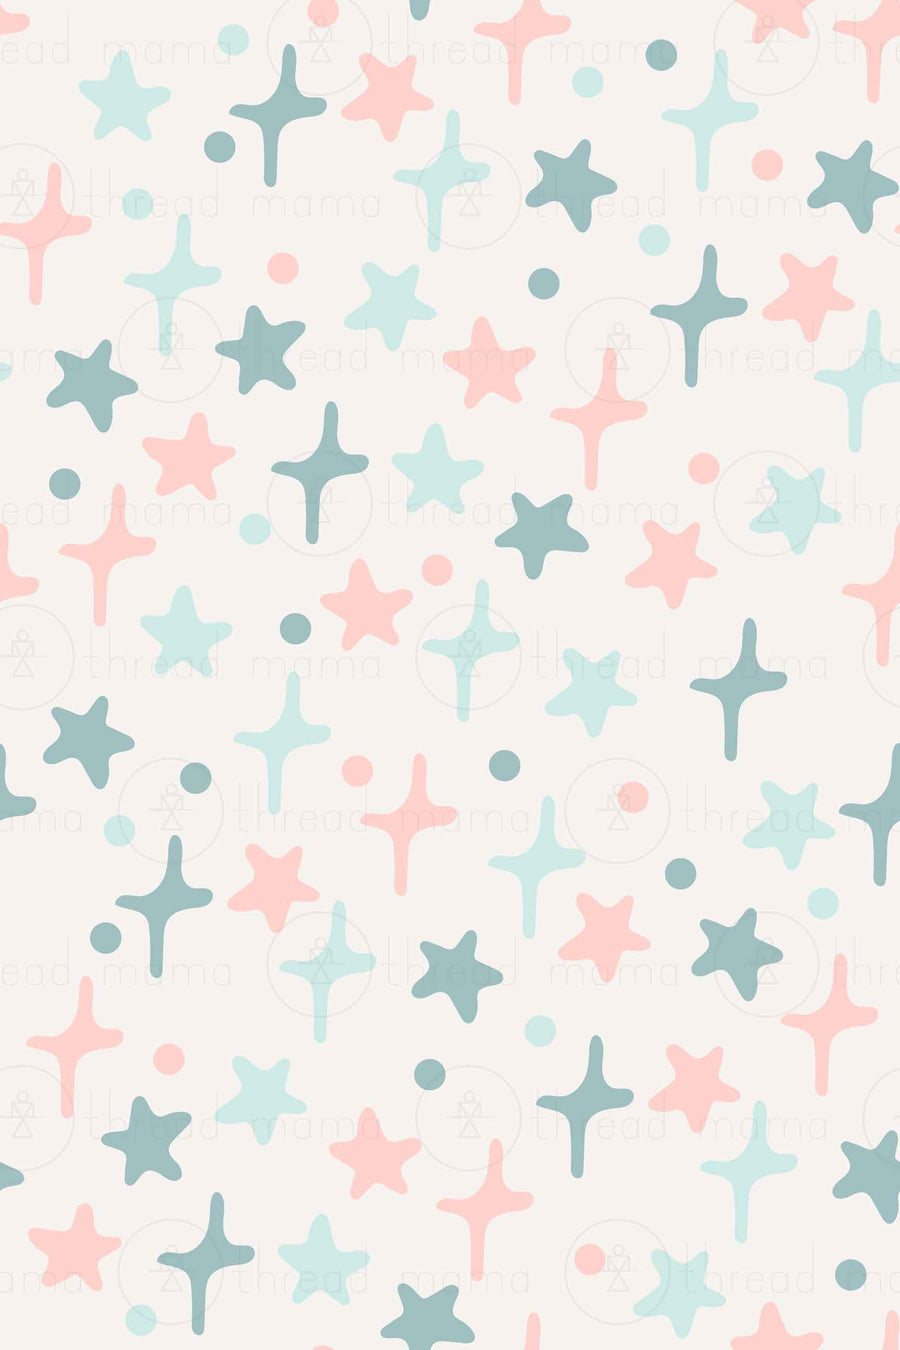 Repeating Pattern 58 (Seamless)